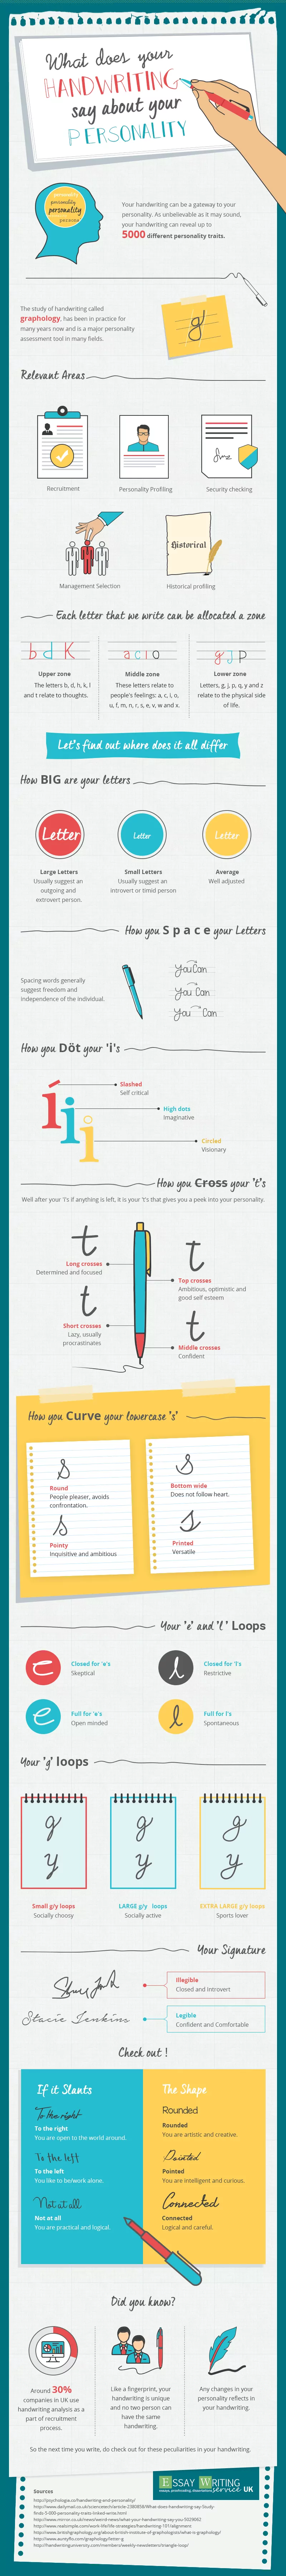 A Beautiful Visual on What Your Handwriting Reveals about Your Personality